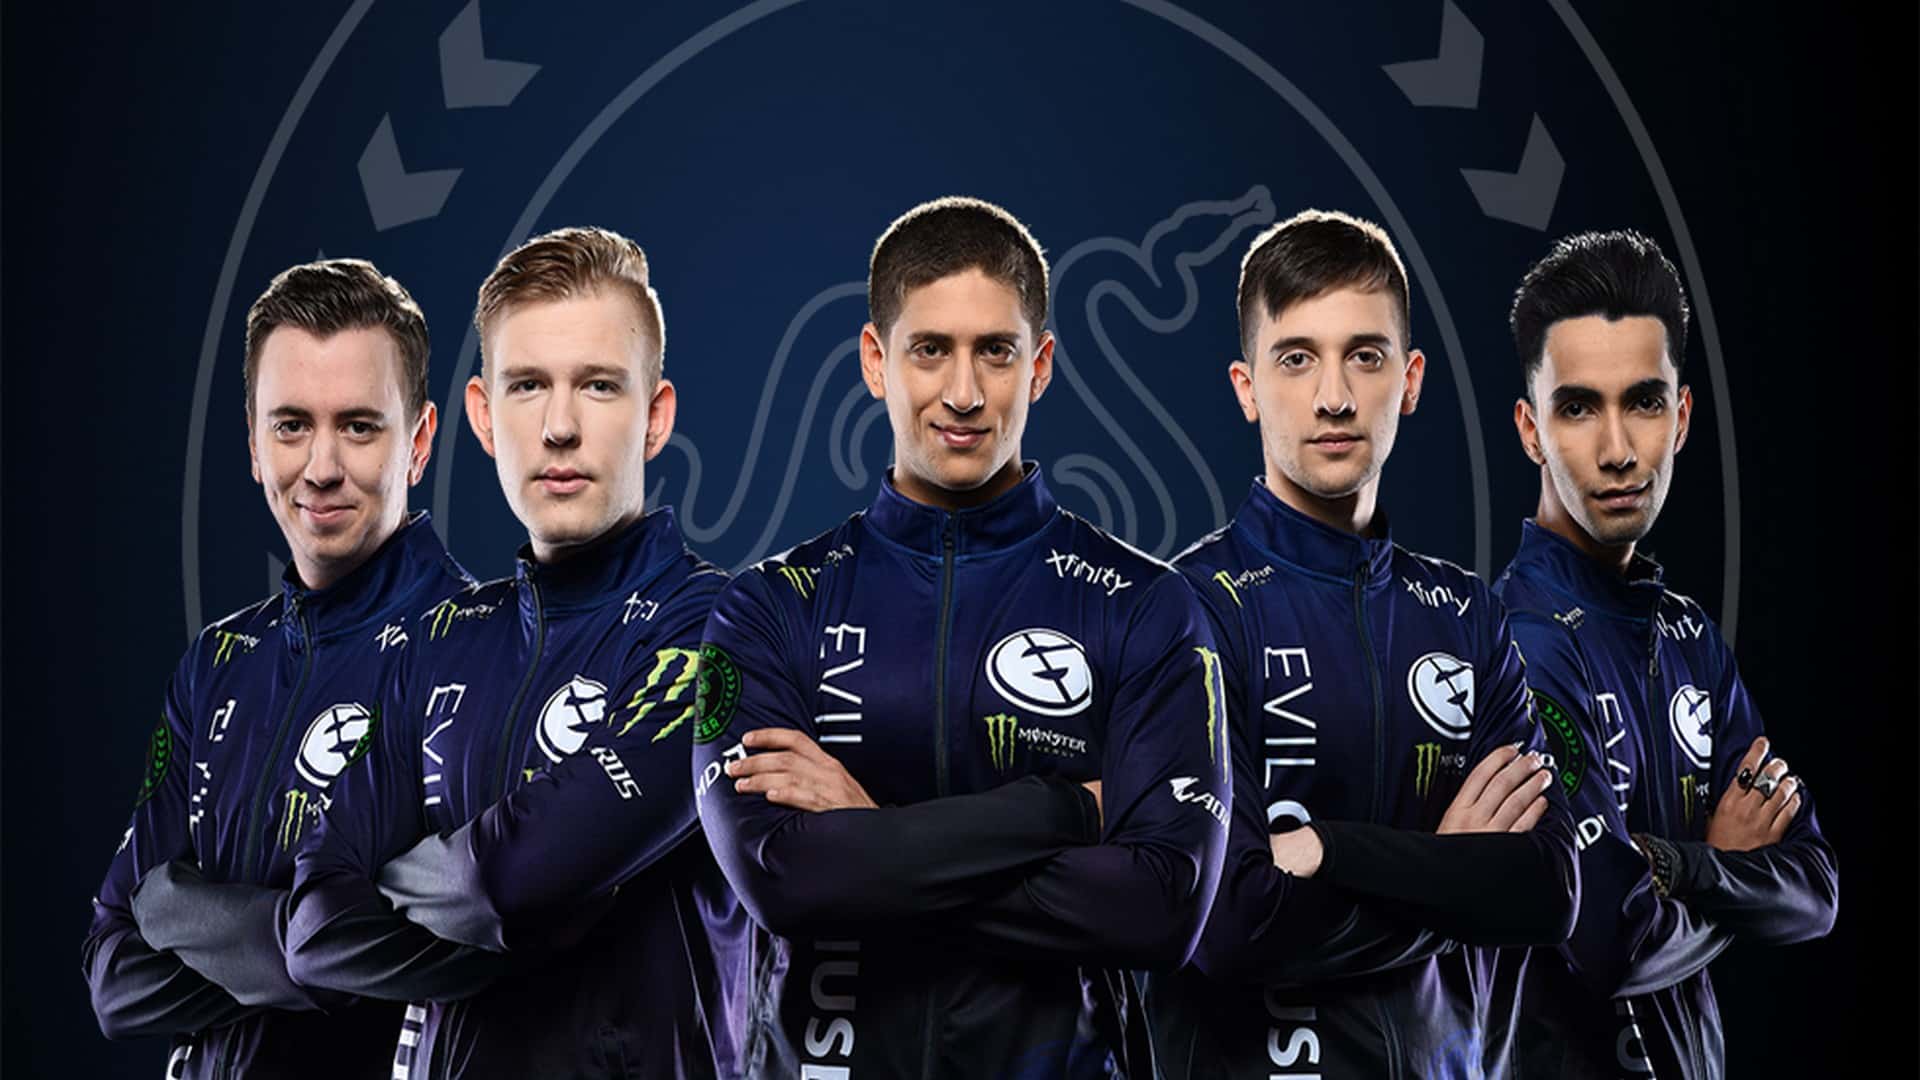 Team Razer And Evil Geniuses To Take The World By Storm | MKAU Gaming